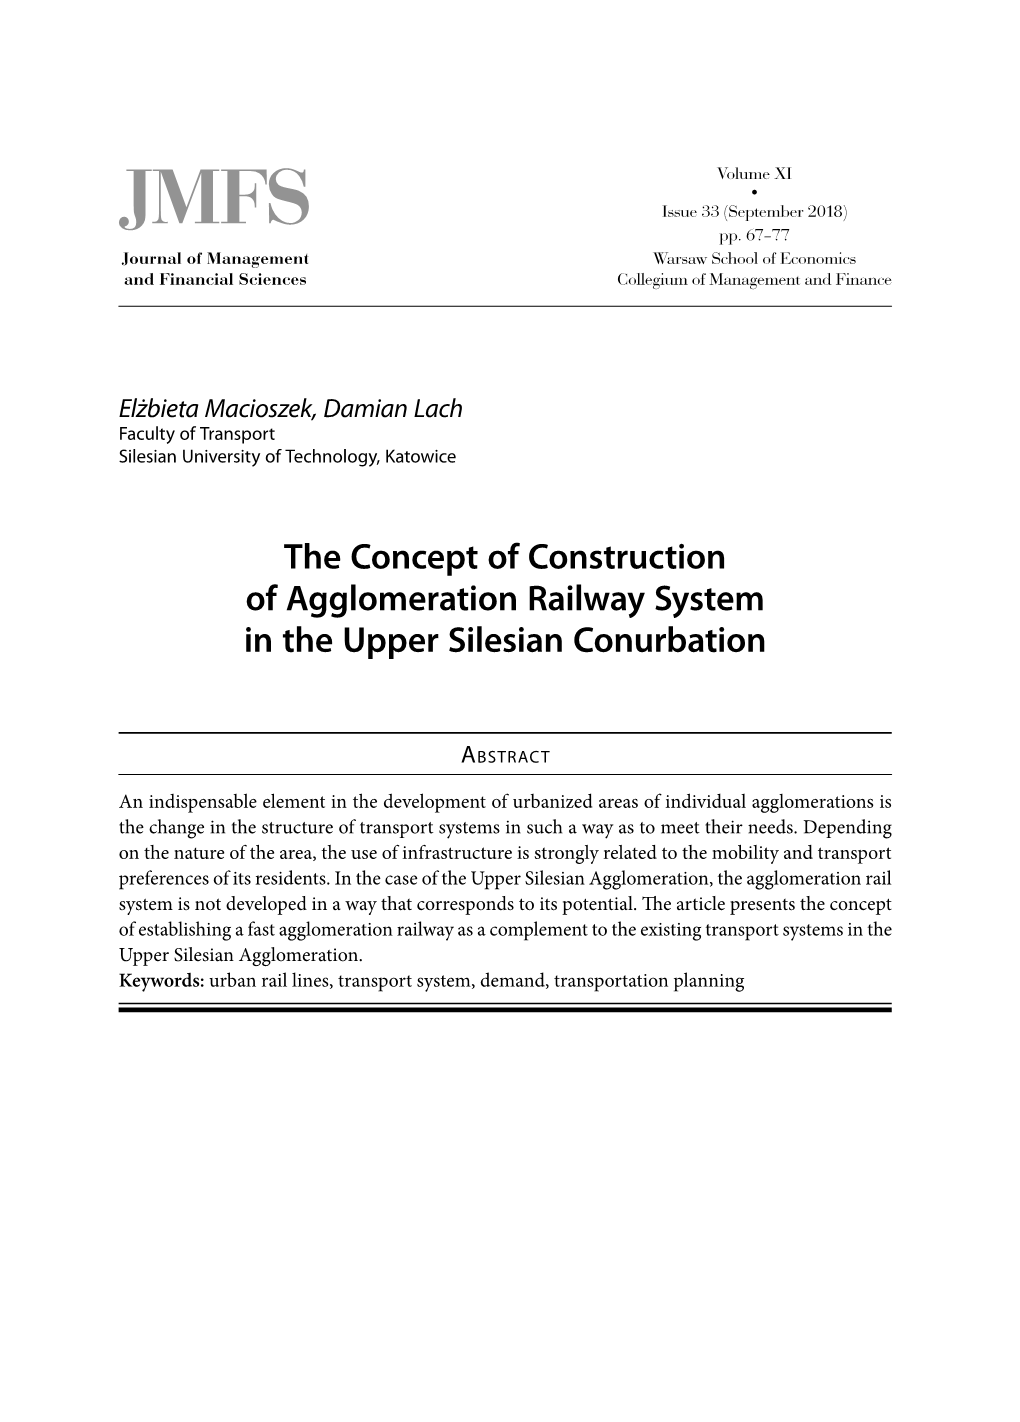 The Concept of Construction of Agglomeration Railway System in the Upper Silesian Conurbation